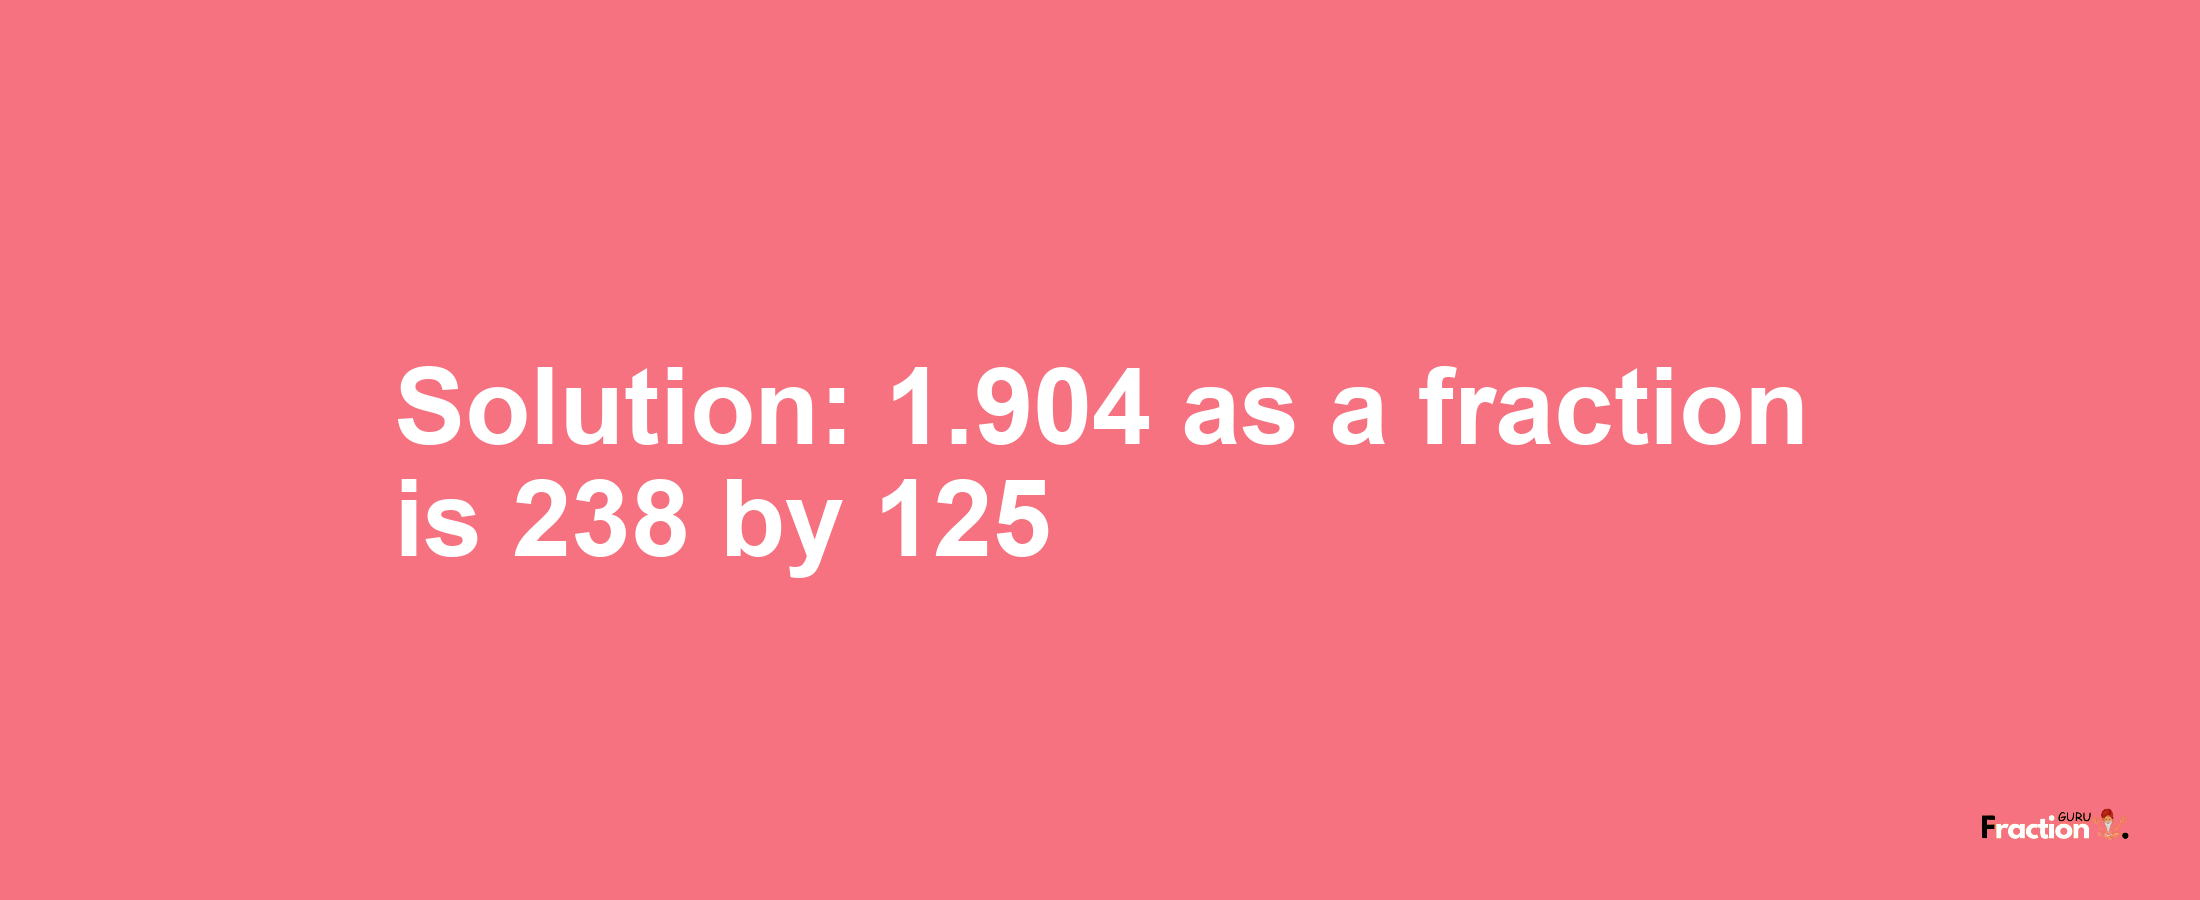 Solution:1.904 as a fraction is 238/125